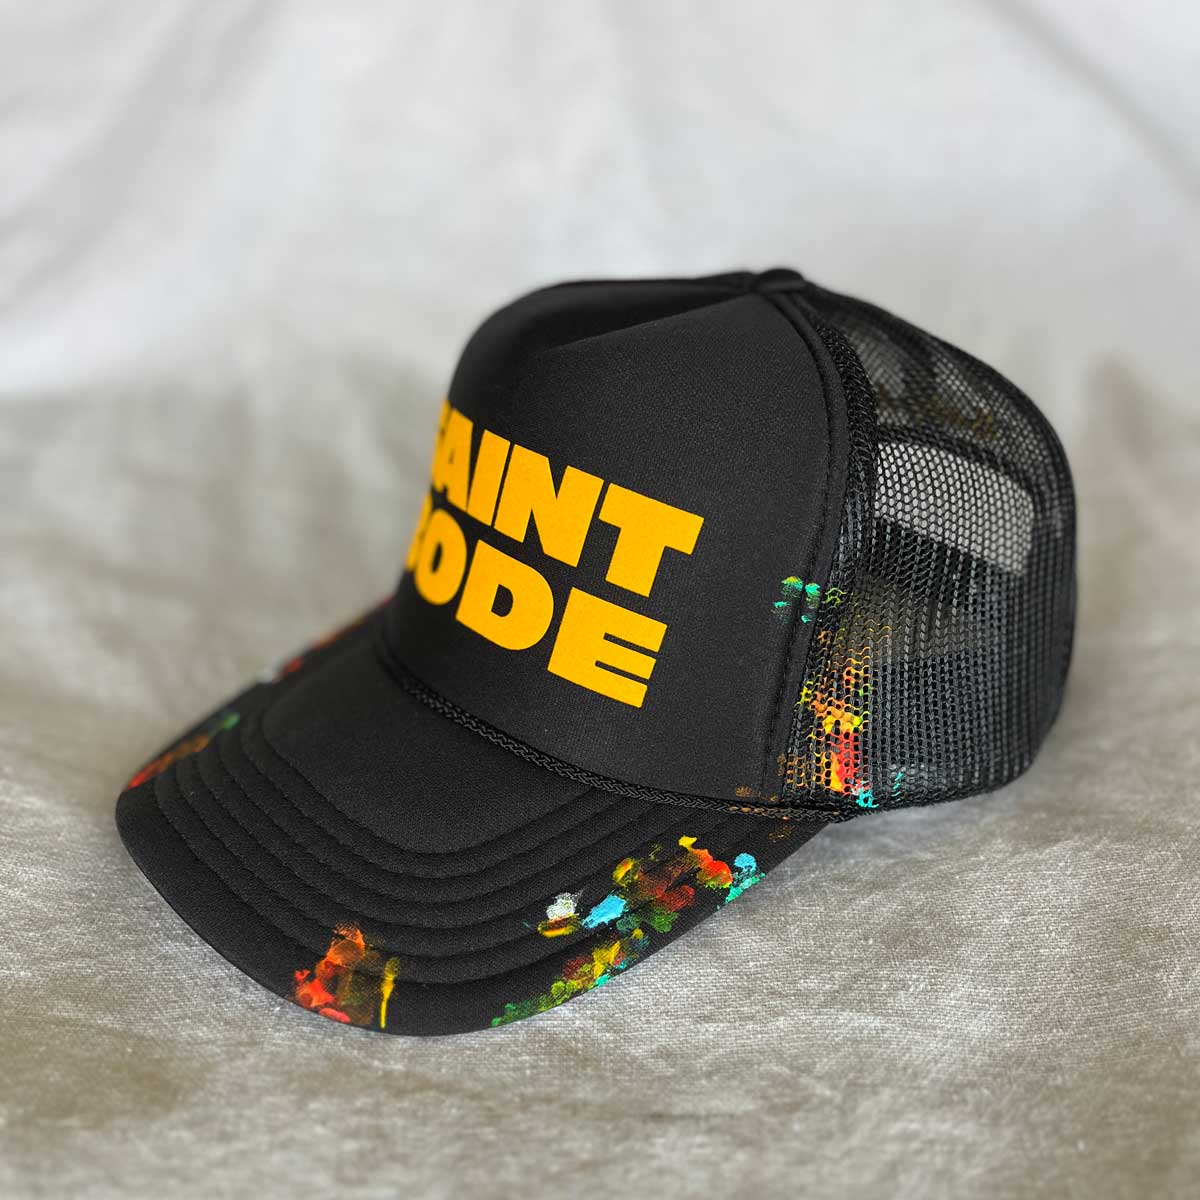 SB Hand Painted Trucker GOLD #9/11 - Mid Crown